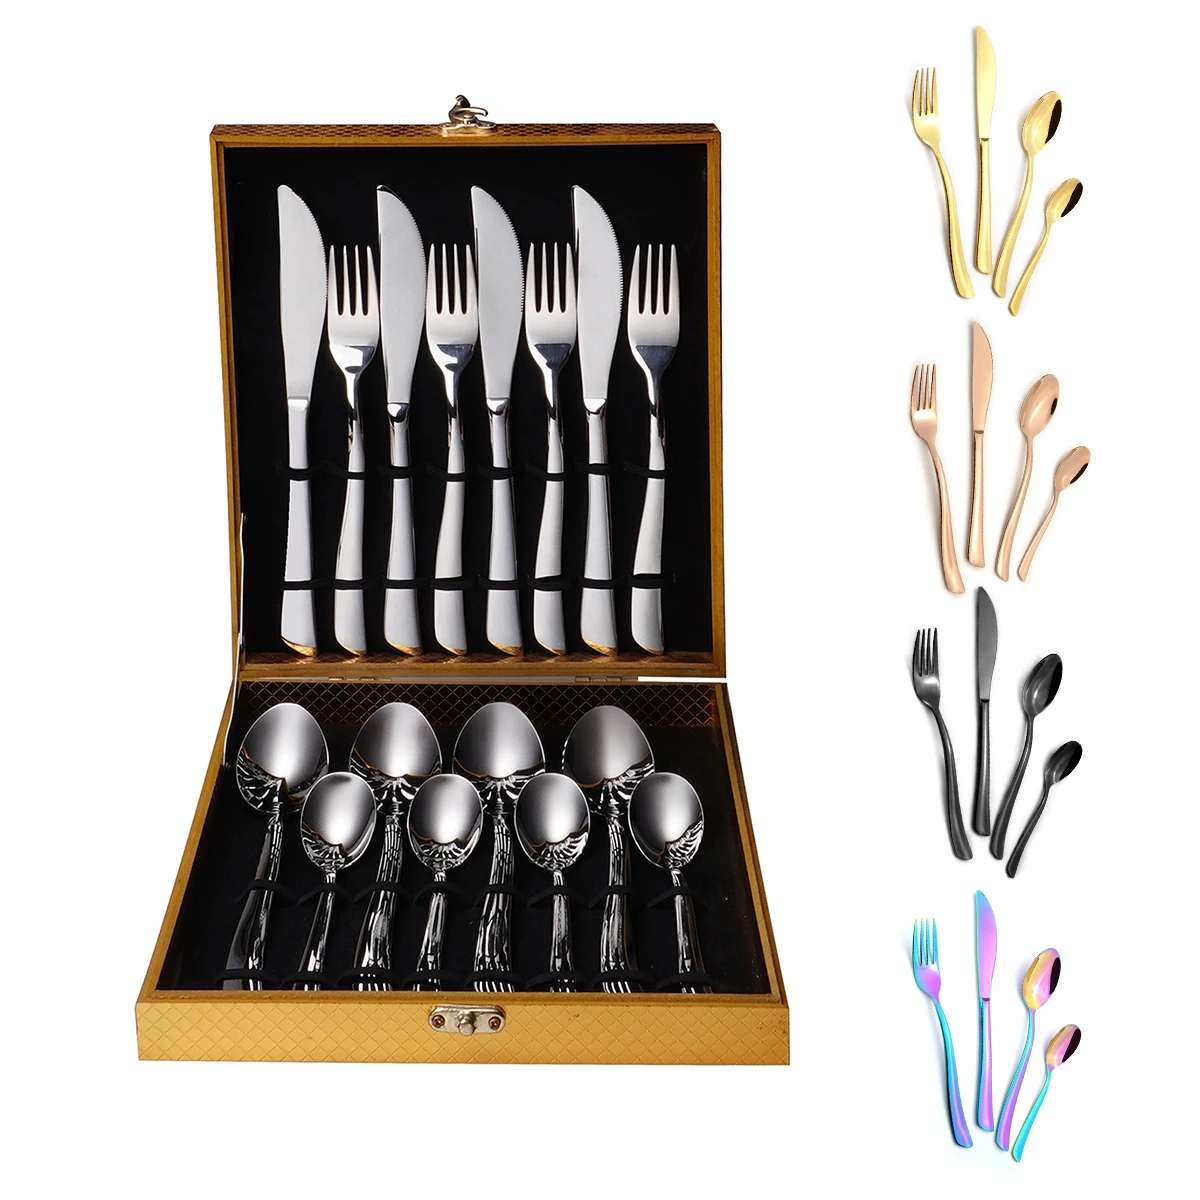 

Royal Wedding Silverware Flatware Reusable Outdoor Kitchen Steak Knife Spoon Fork Gold Cutlery Set Stainless With Wooden Box, Silver, gold, rose gold, color, black